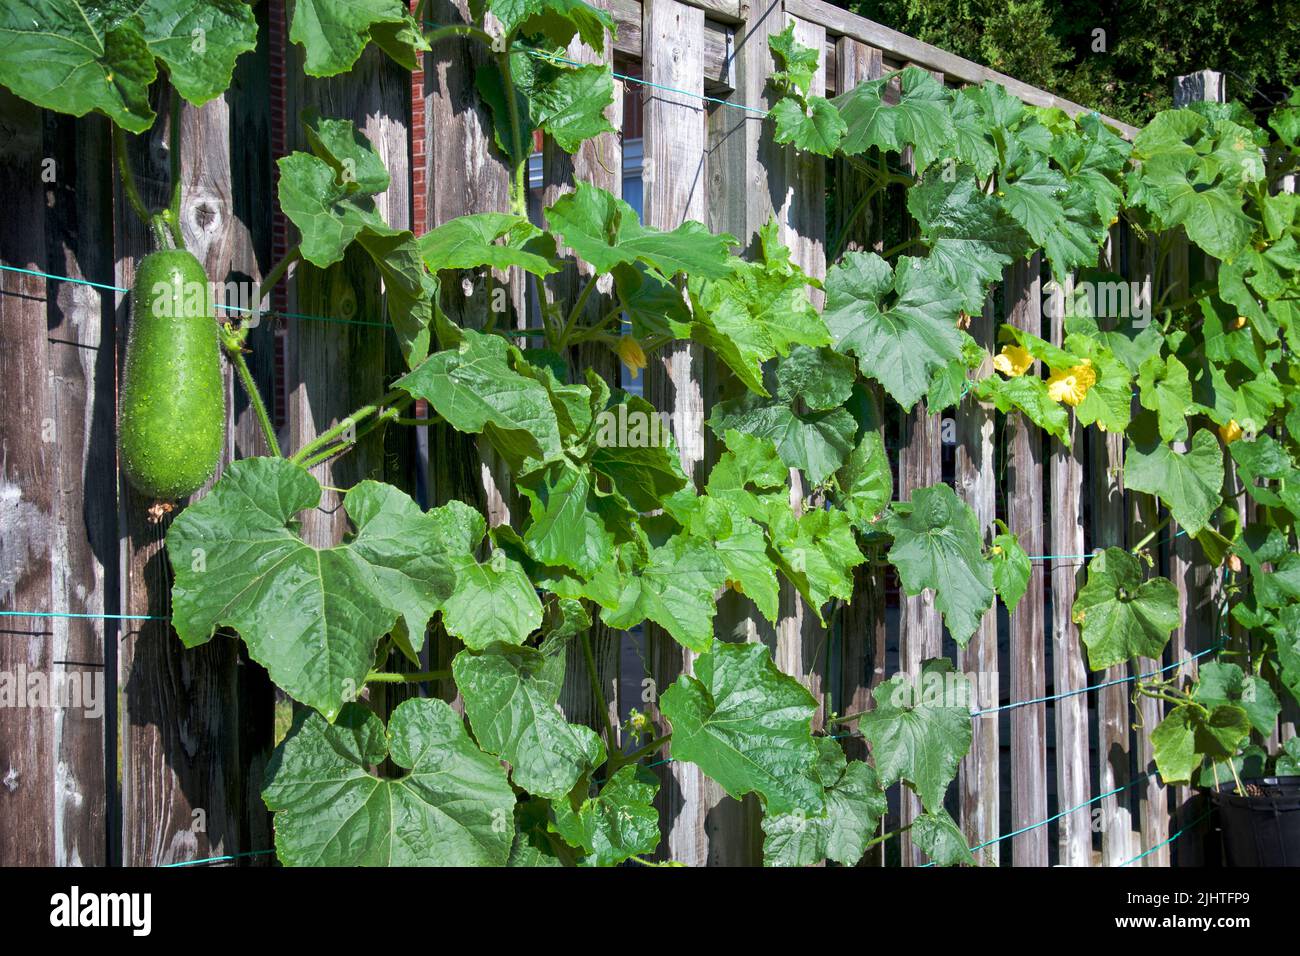 Urban gardening project.  Organic fuzzy melons climbing up the fence Stock Photo